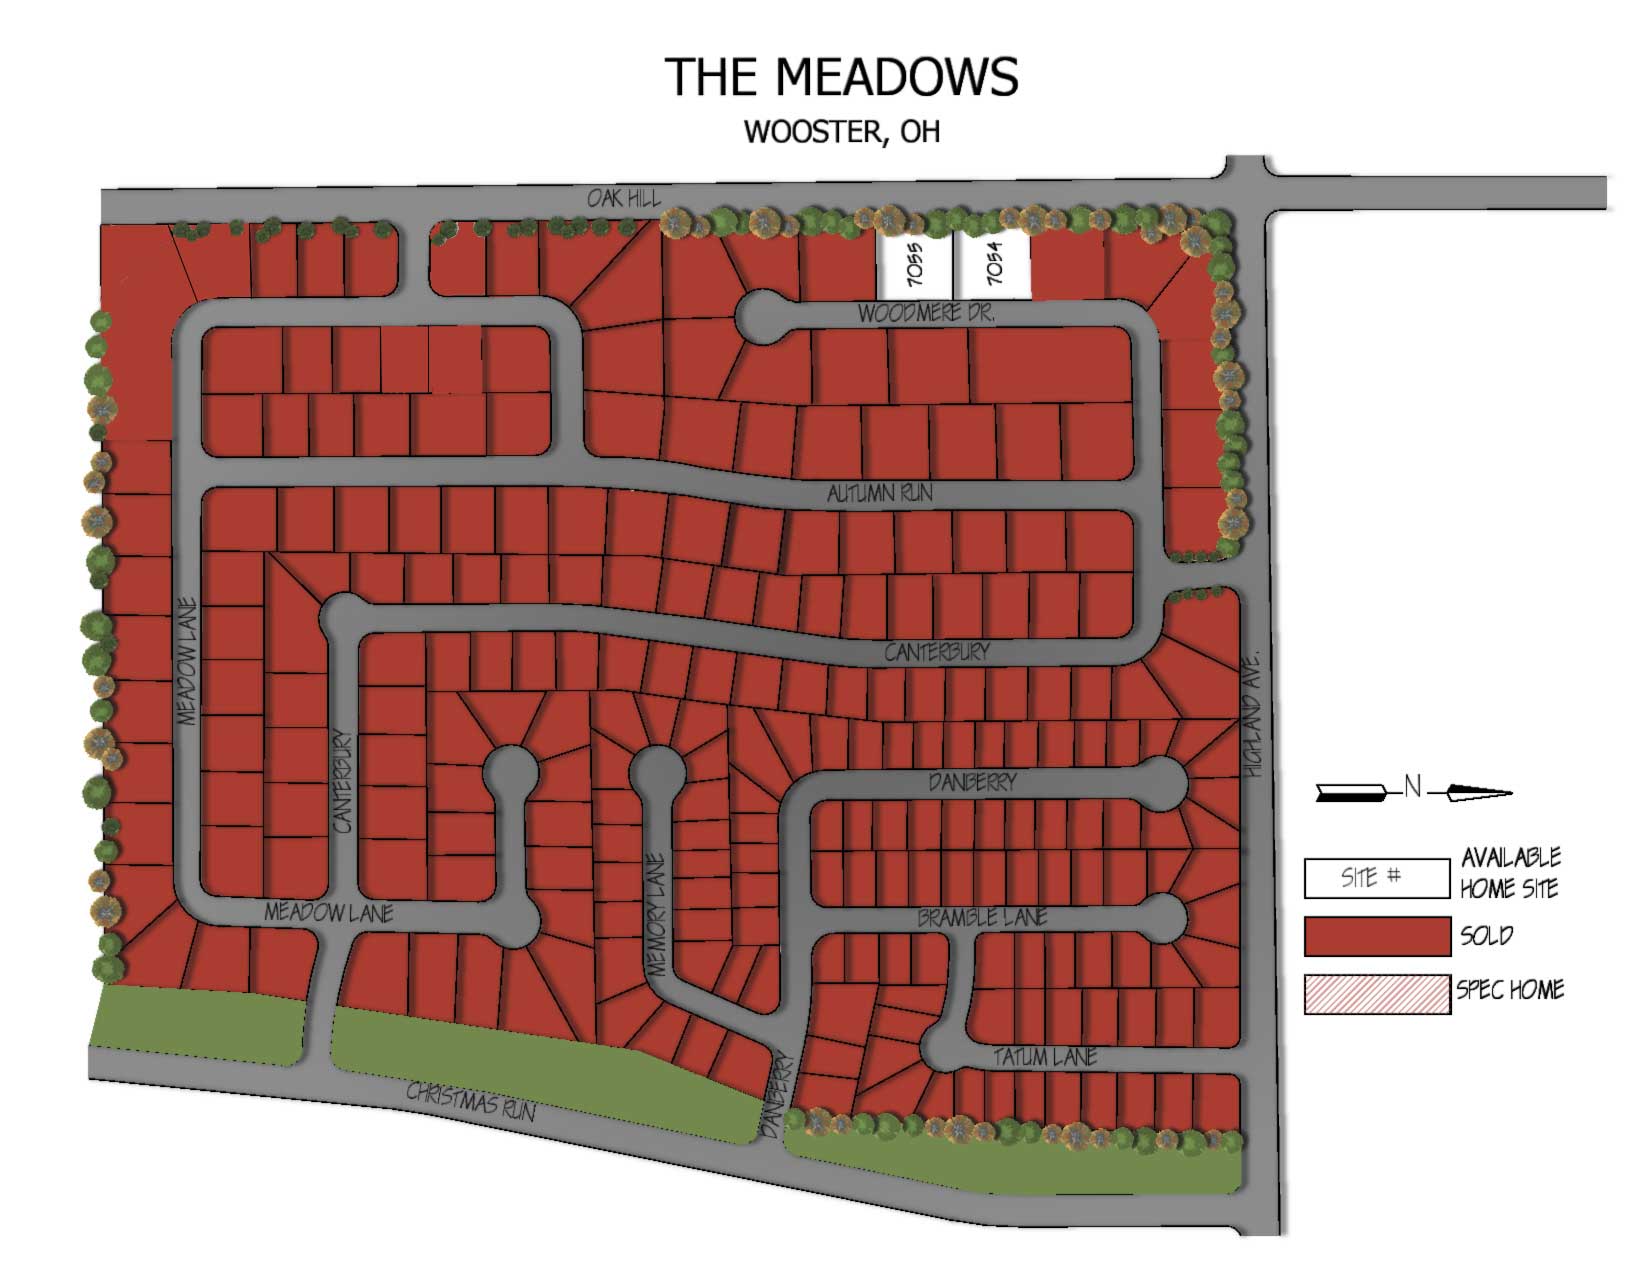 The meadows in Wooster Ohio plot map.